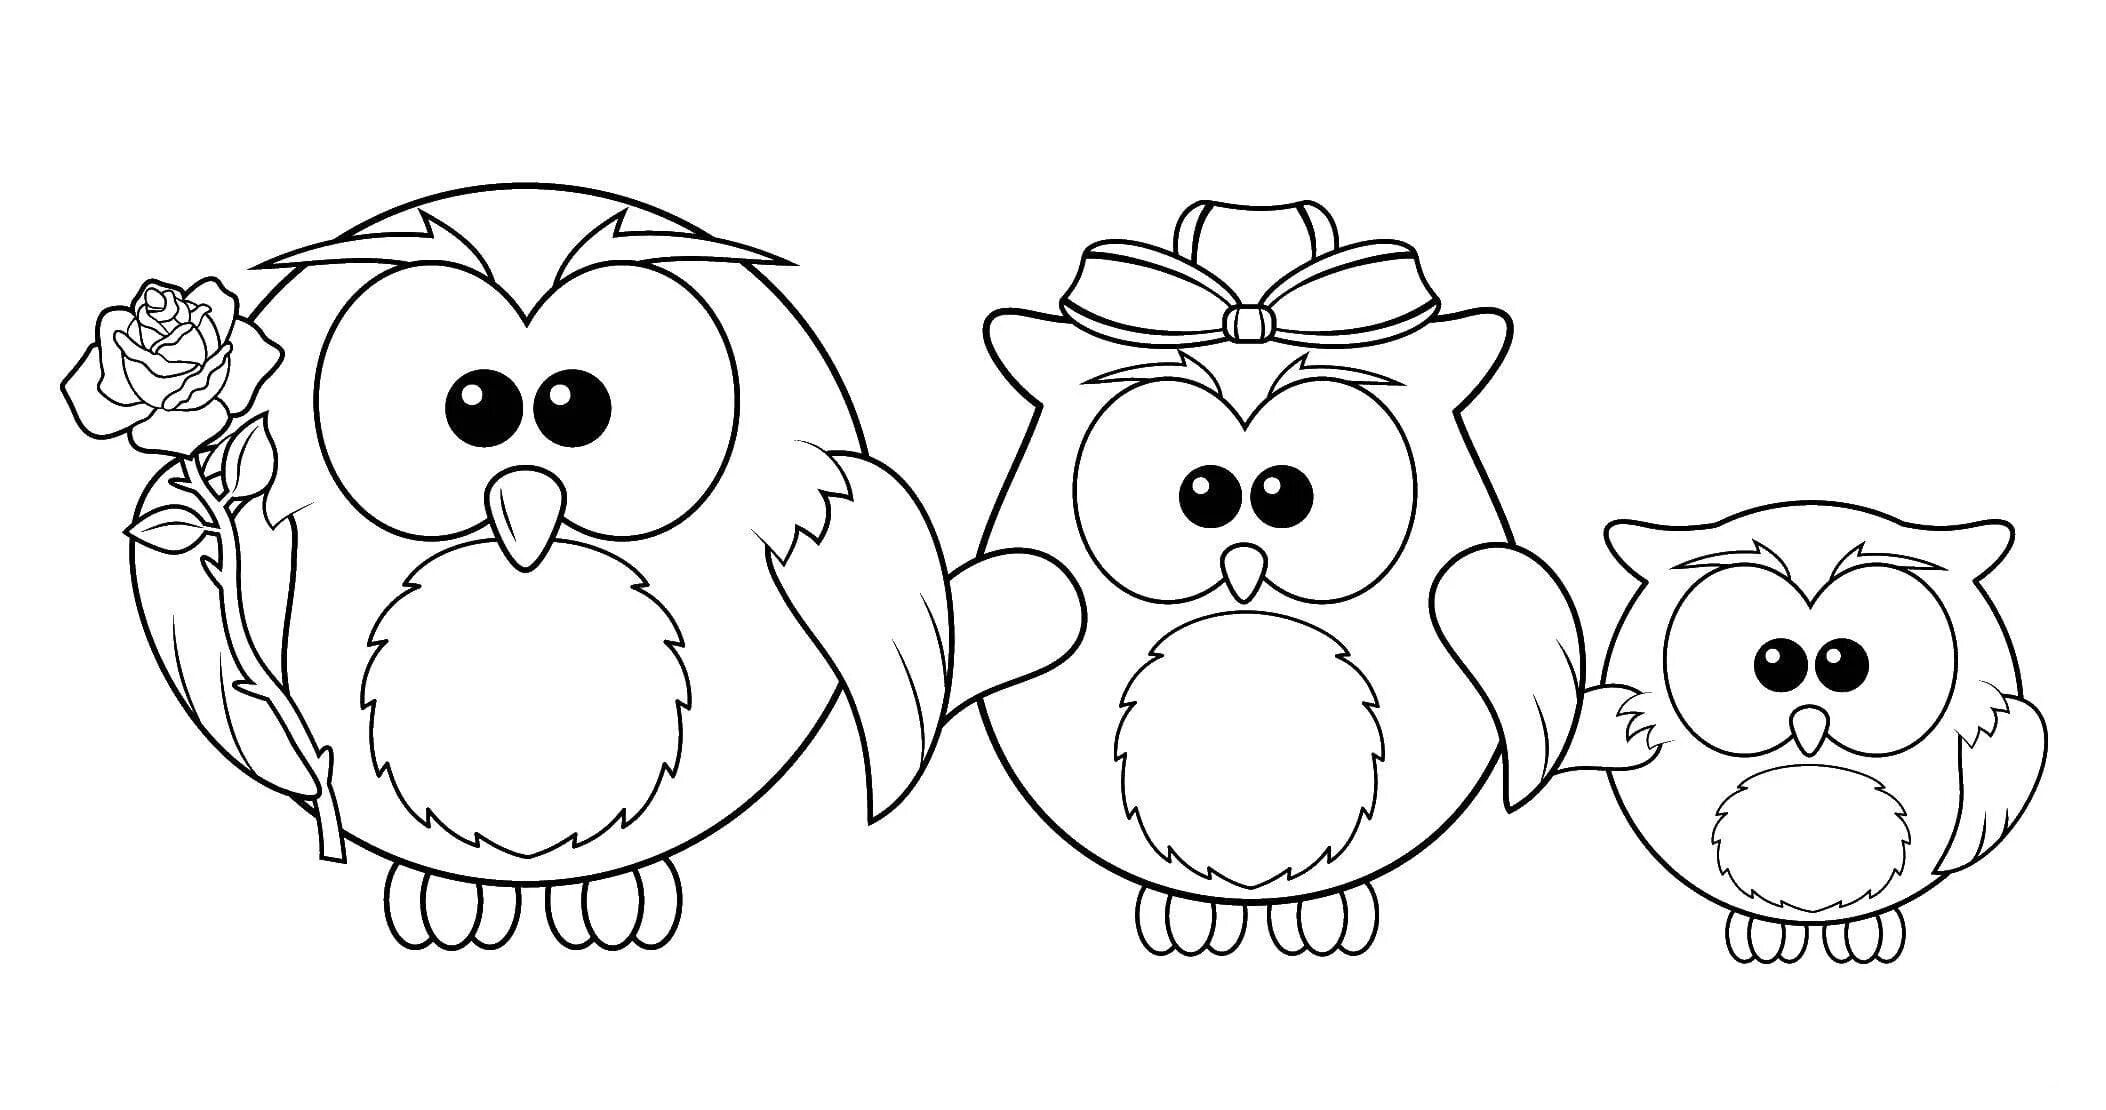 Owl for babies #5